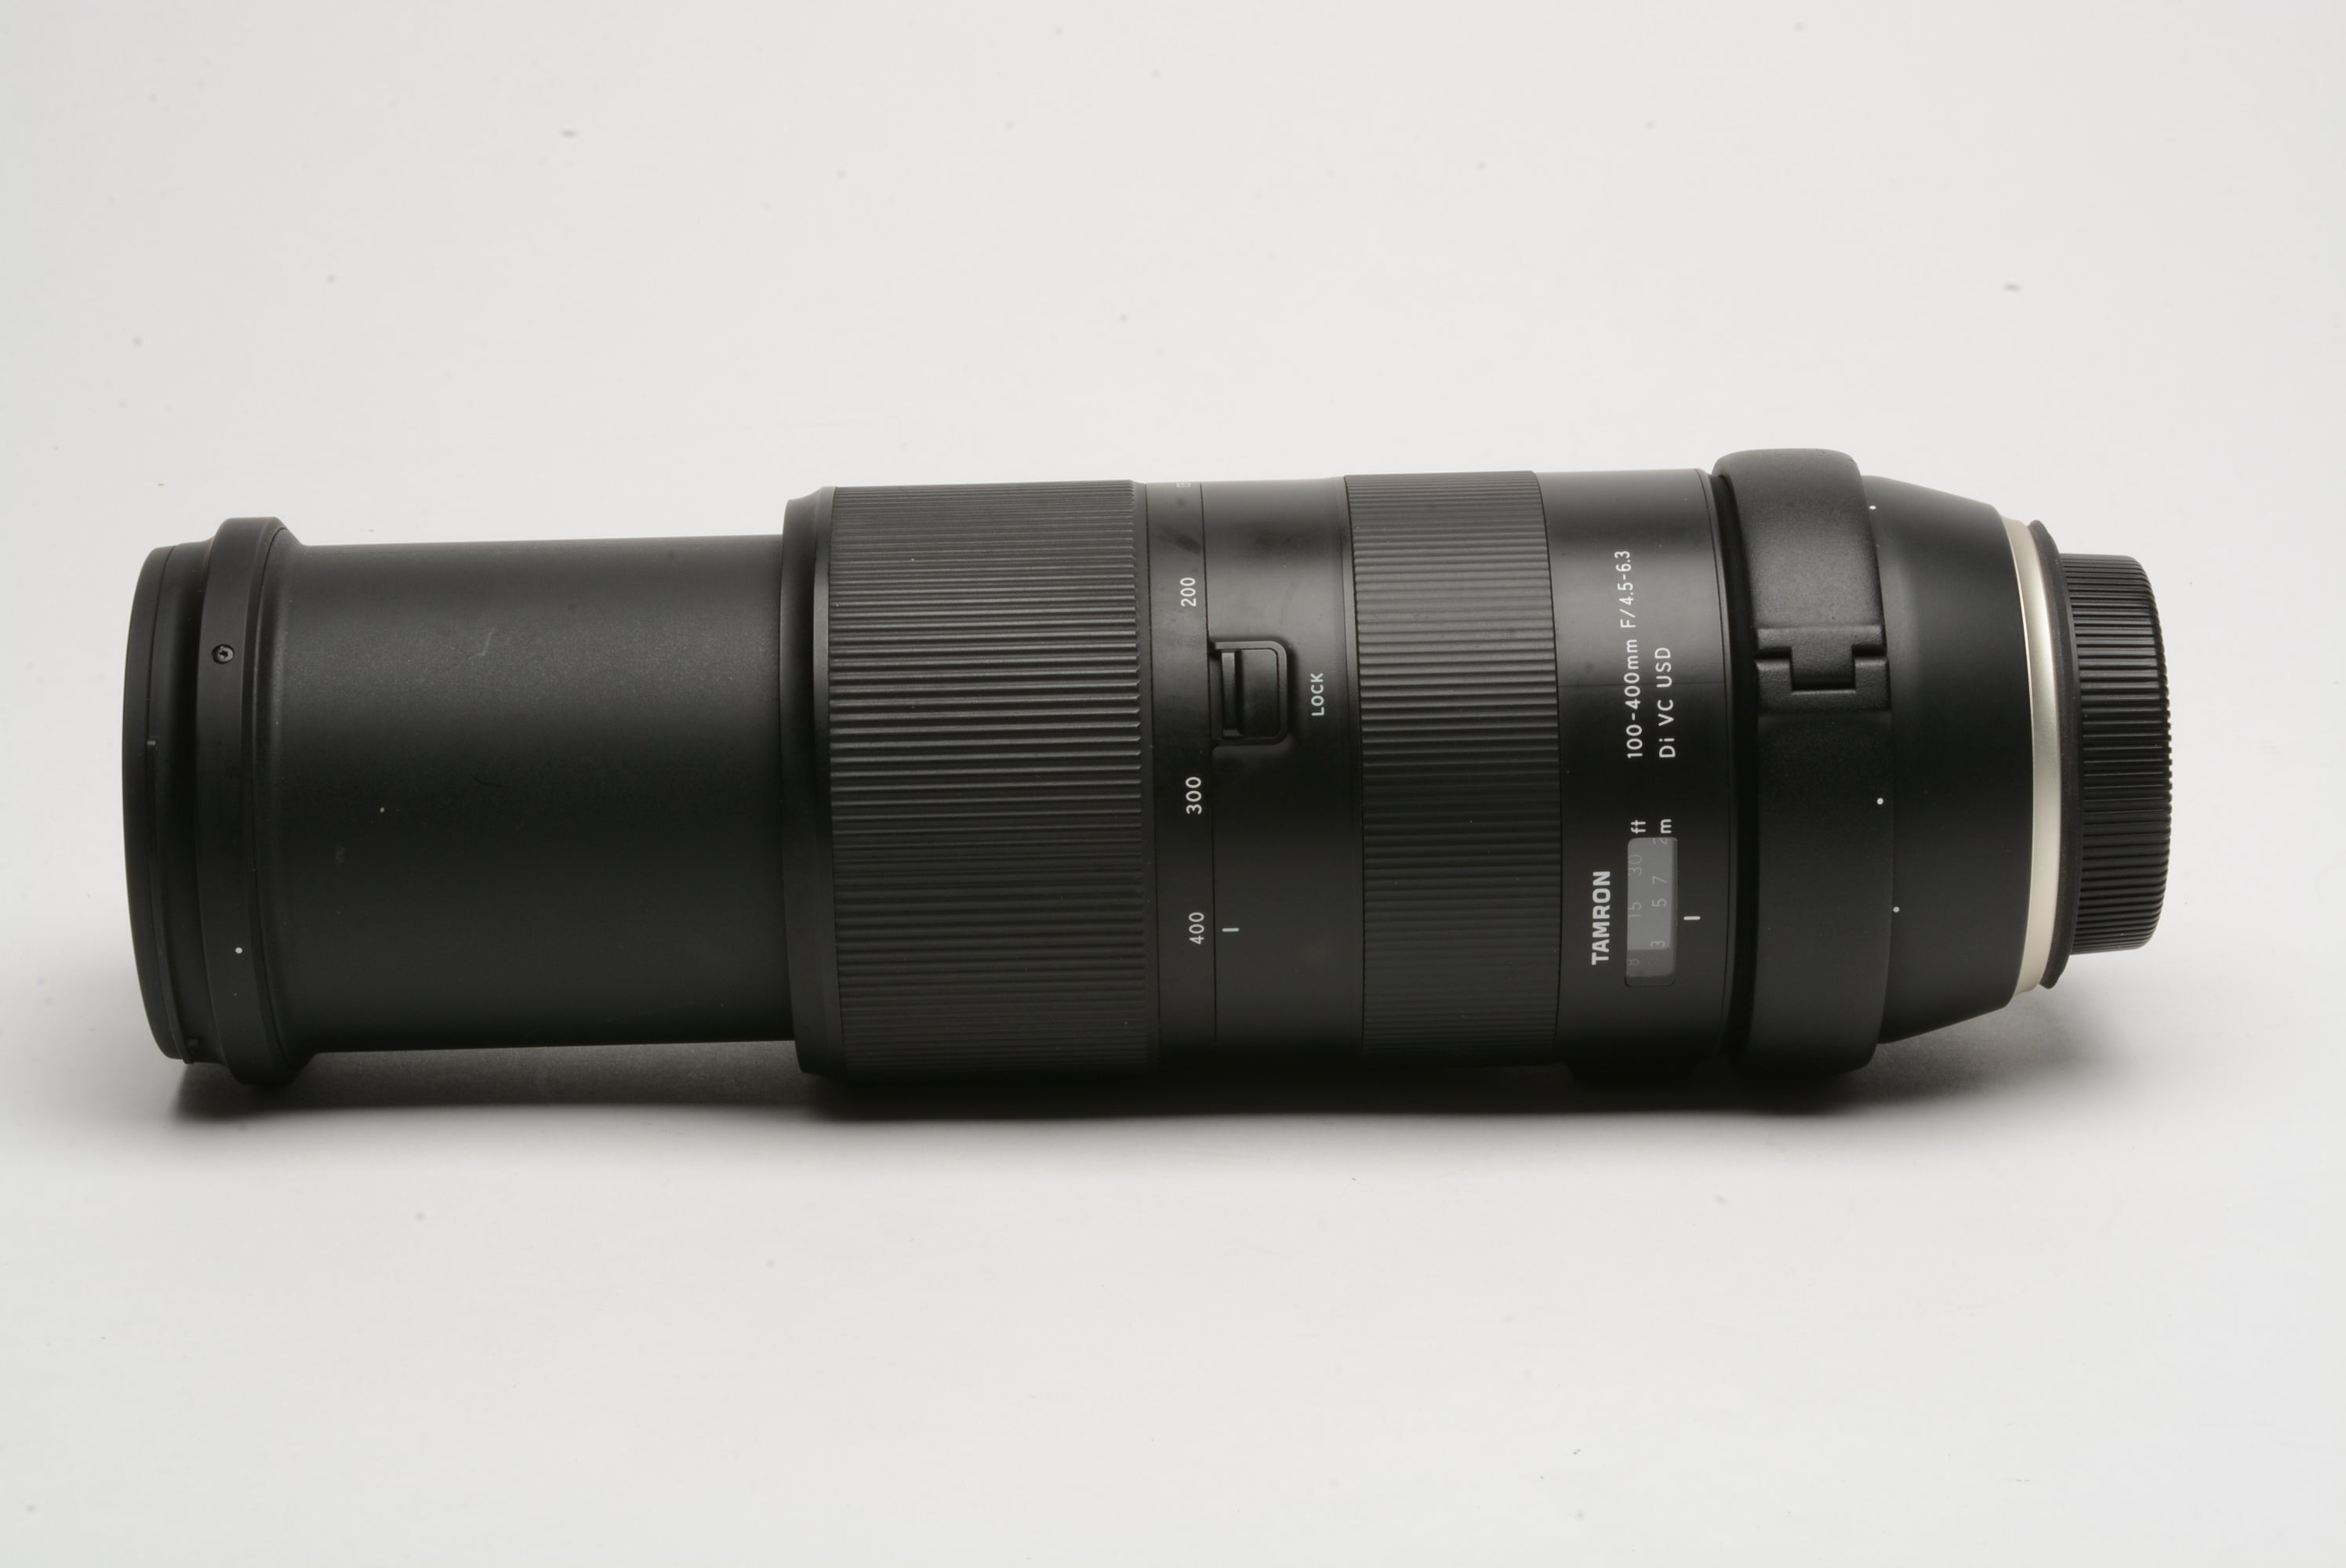 Tamron 100-400mm f4.5-6.3 Di VC USD Tele Zoom for Canon EF A035,  hood+collar, Nice!